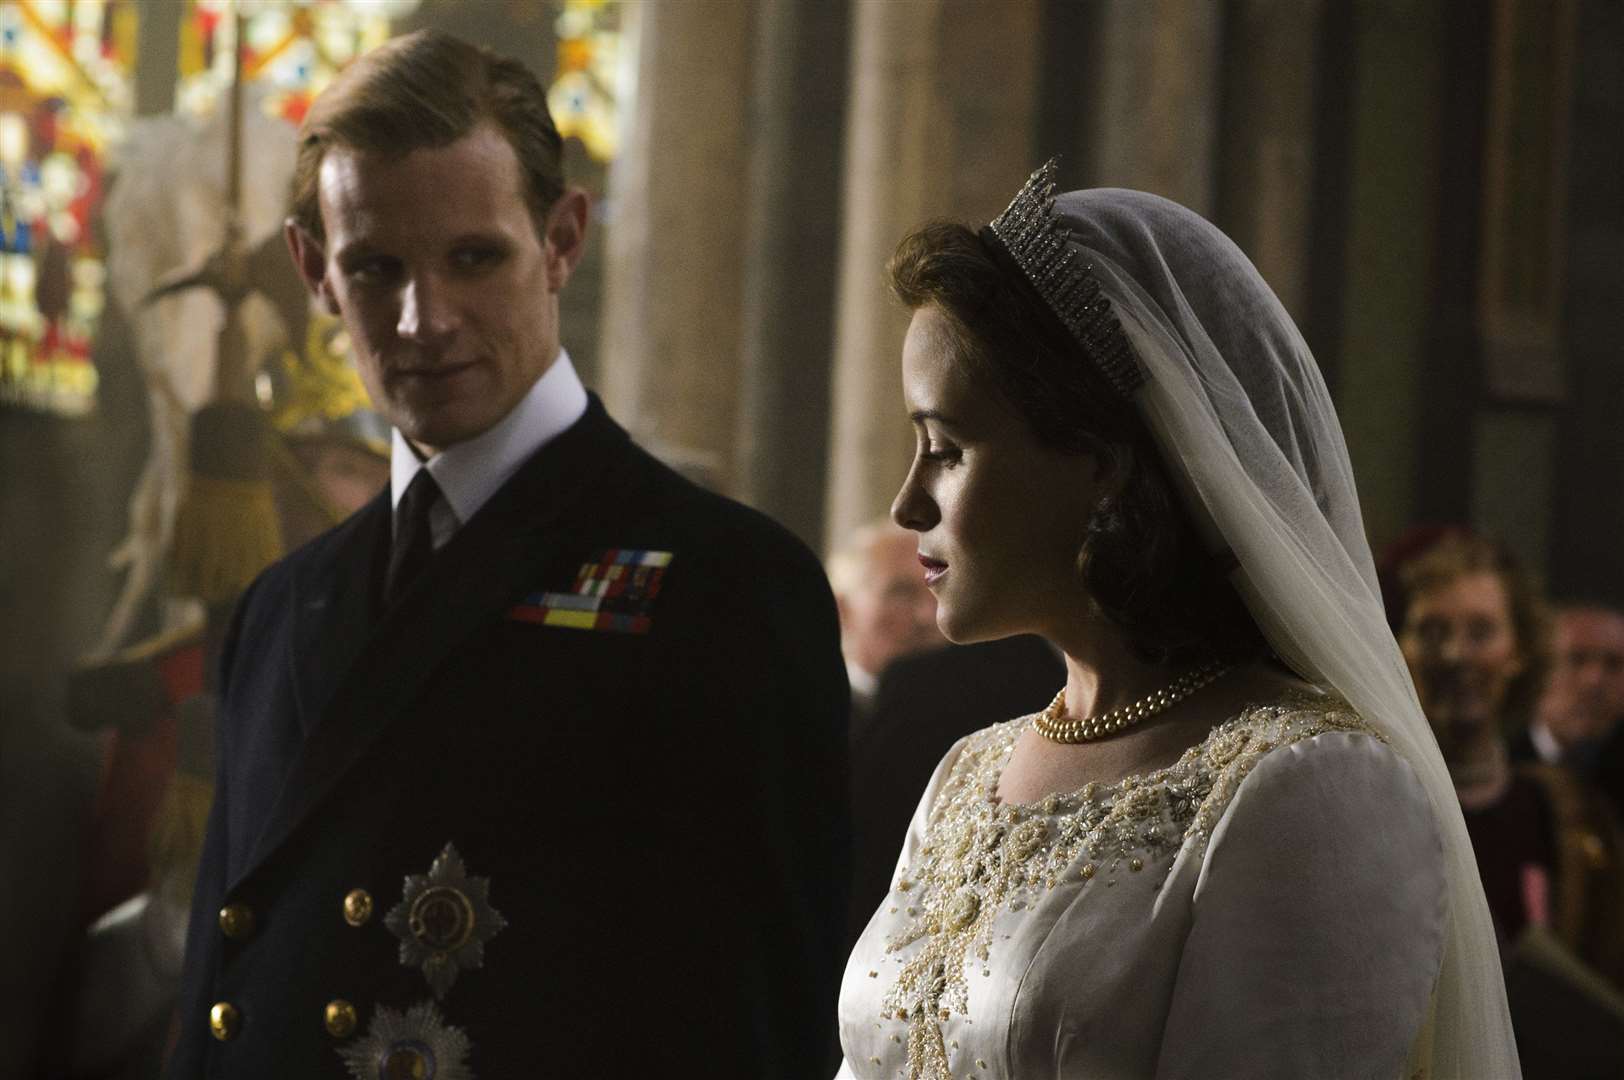 Will we miss out on the next season of The Crown?